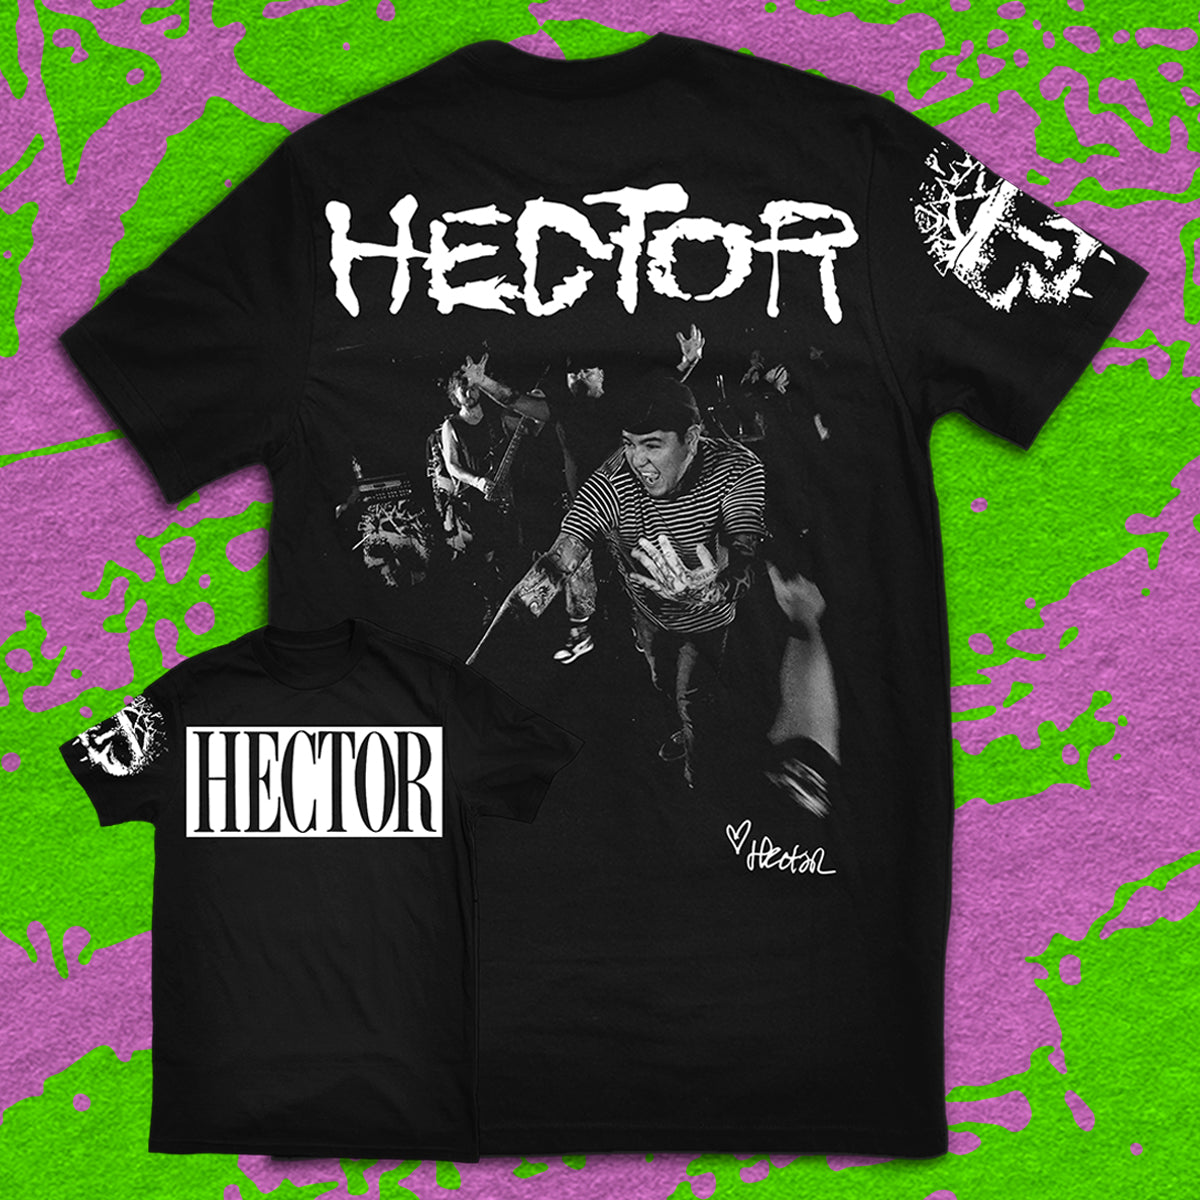 INTEGRITY "HECTOR FOREVER" SHIRT